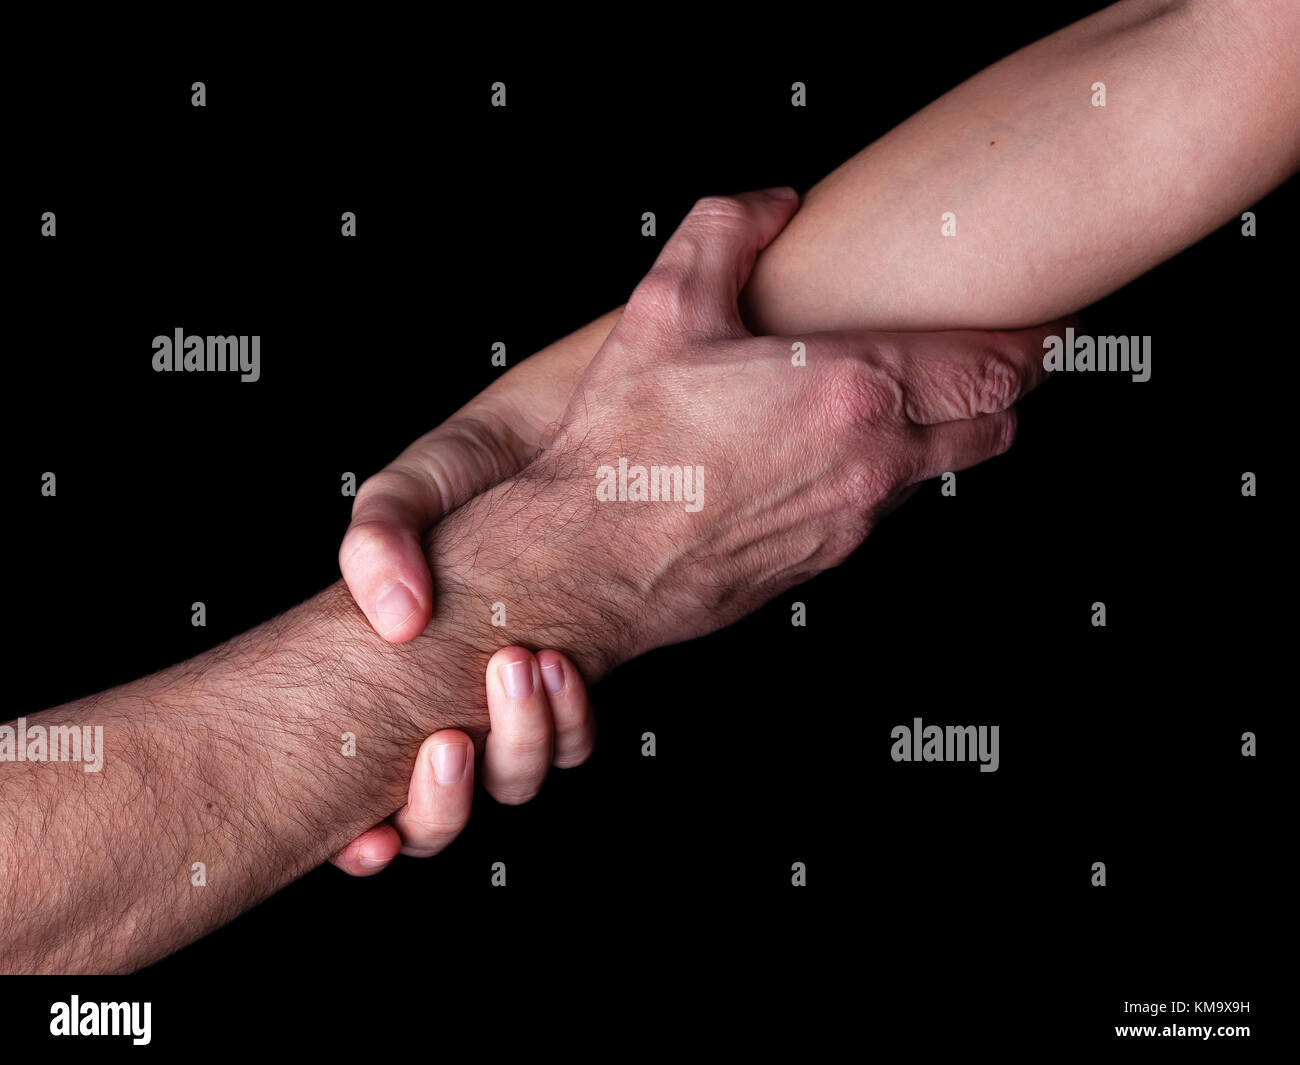 Woman saving rescuing and helping man by holding or griping the forearm Female hand and arm pulling up male. Concept of rescue love friendship support Stock Photo